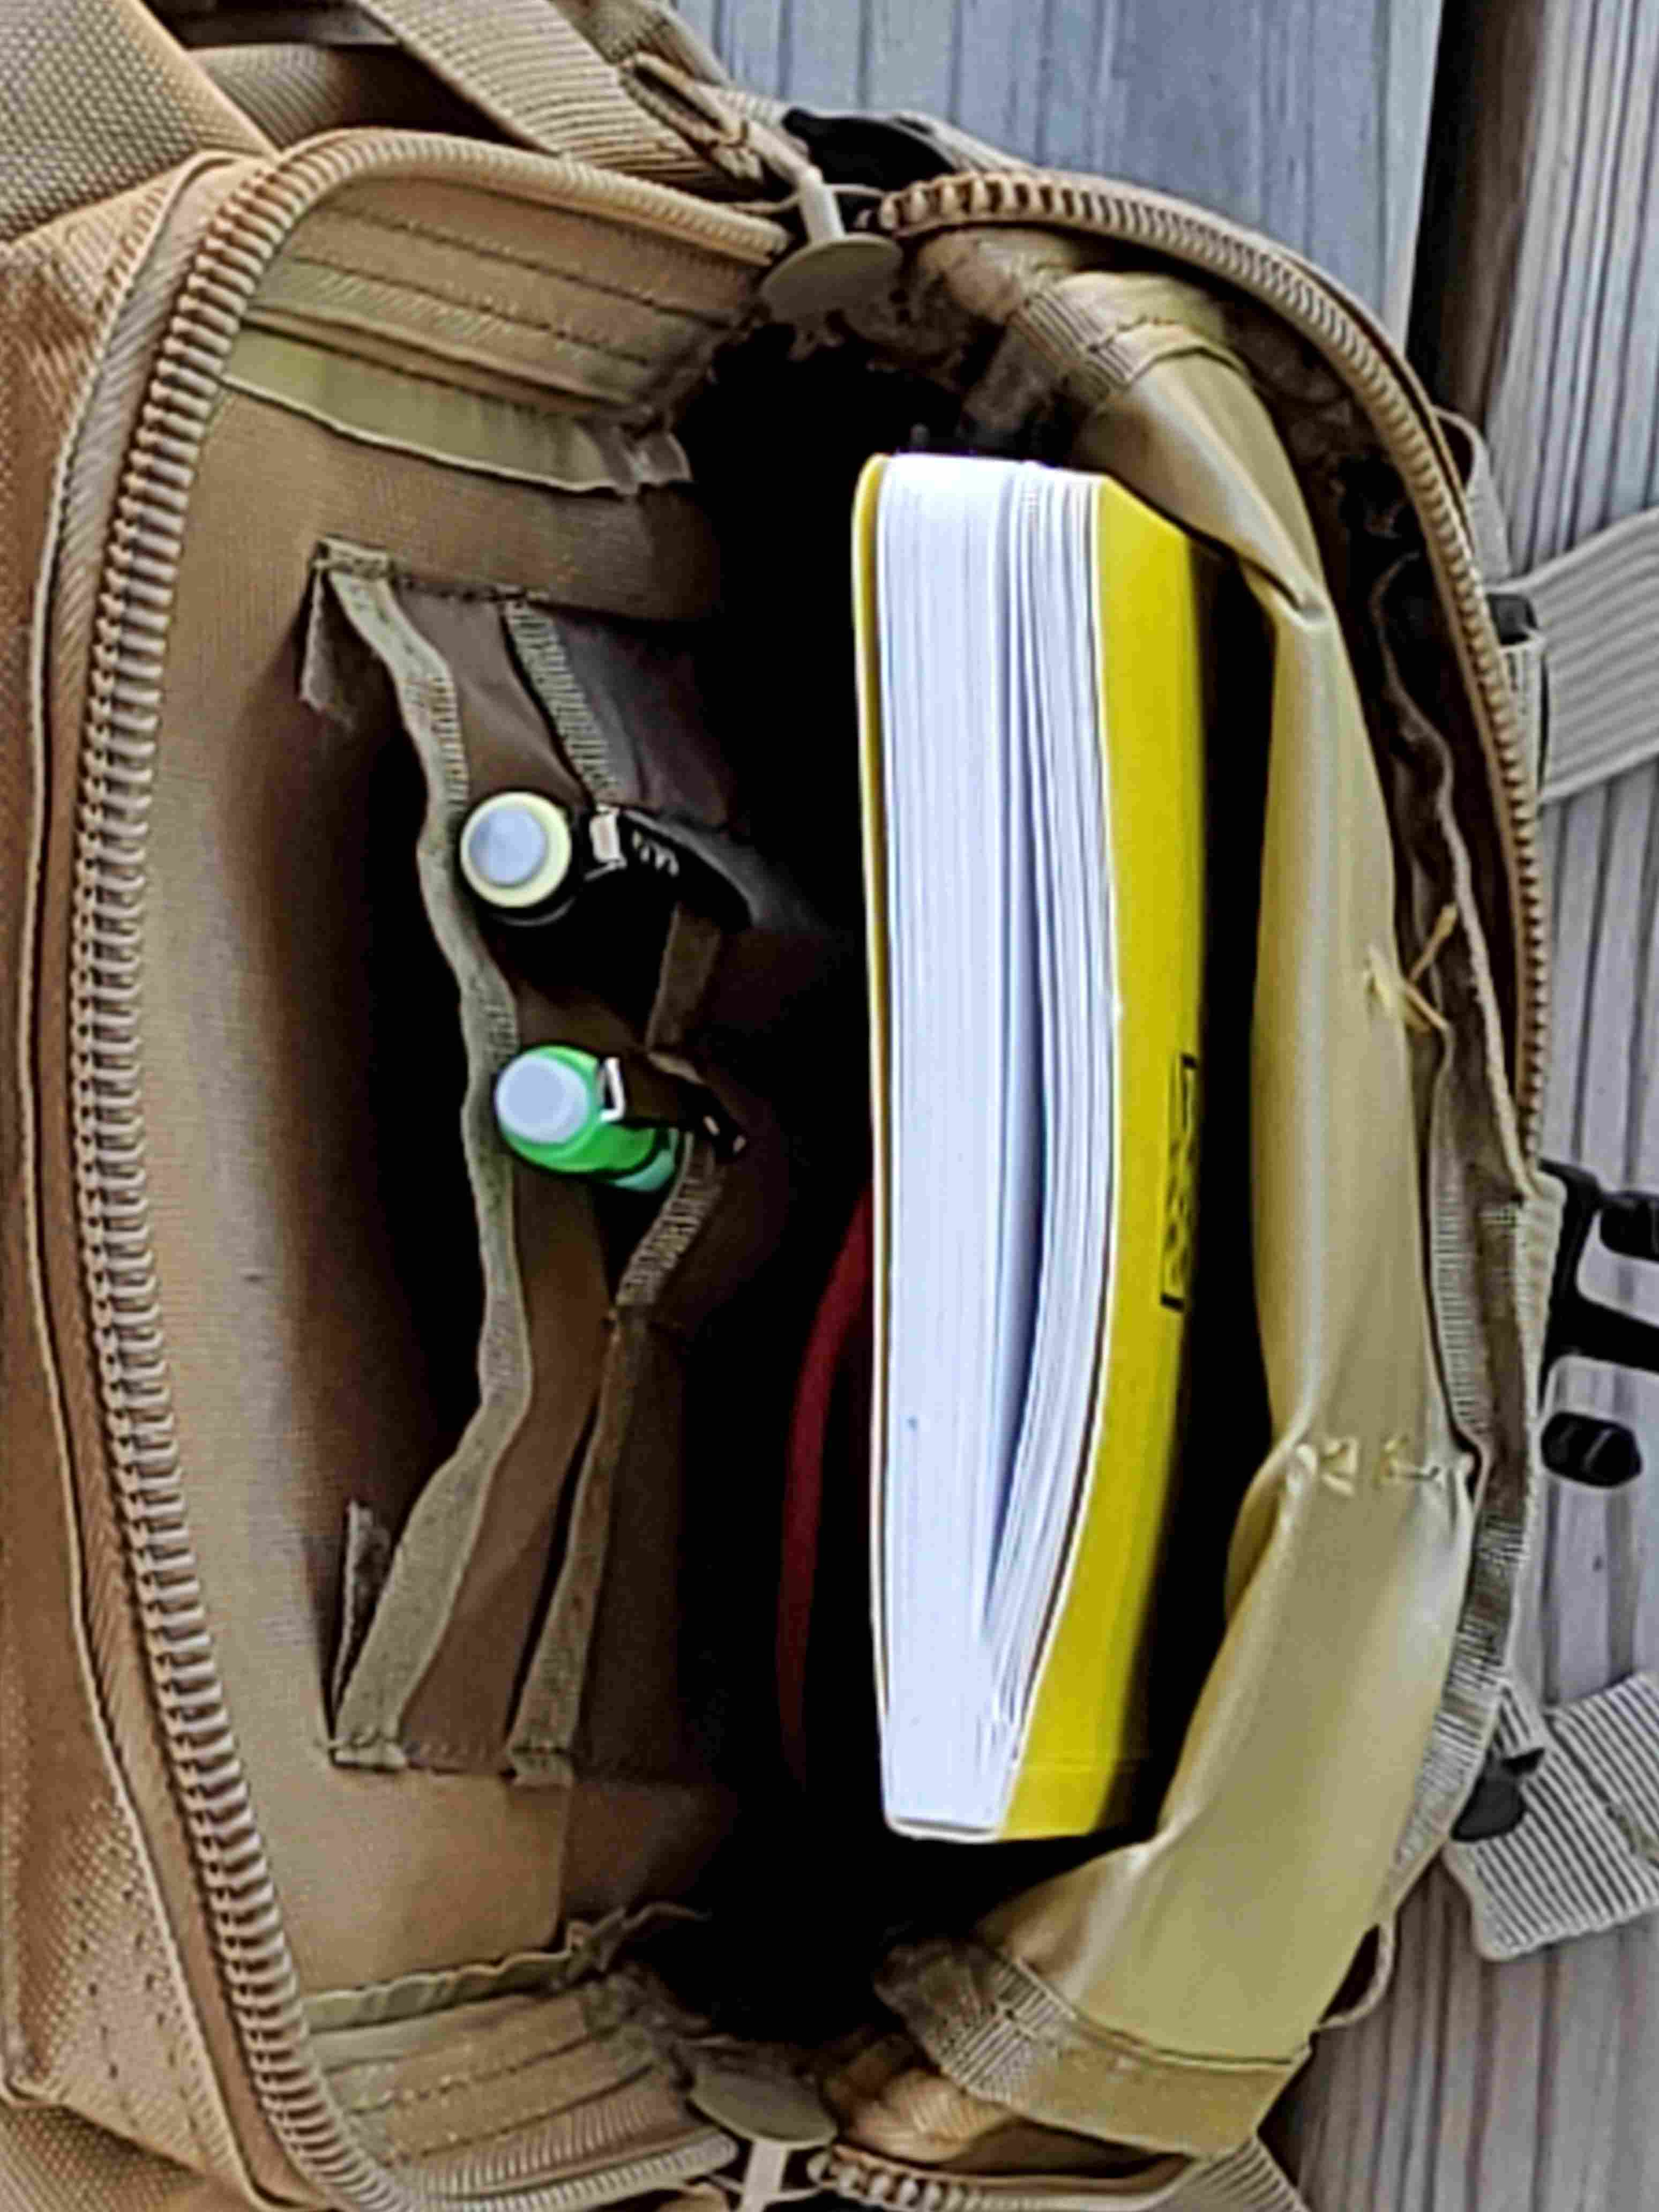 Small pocket of tactical daypack, with logbook, pencils, etc.